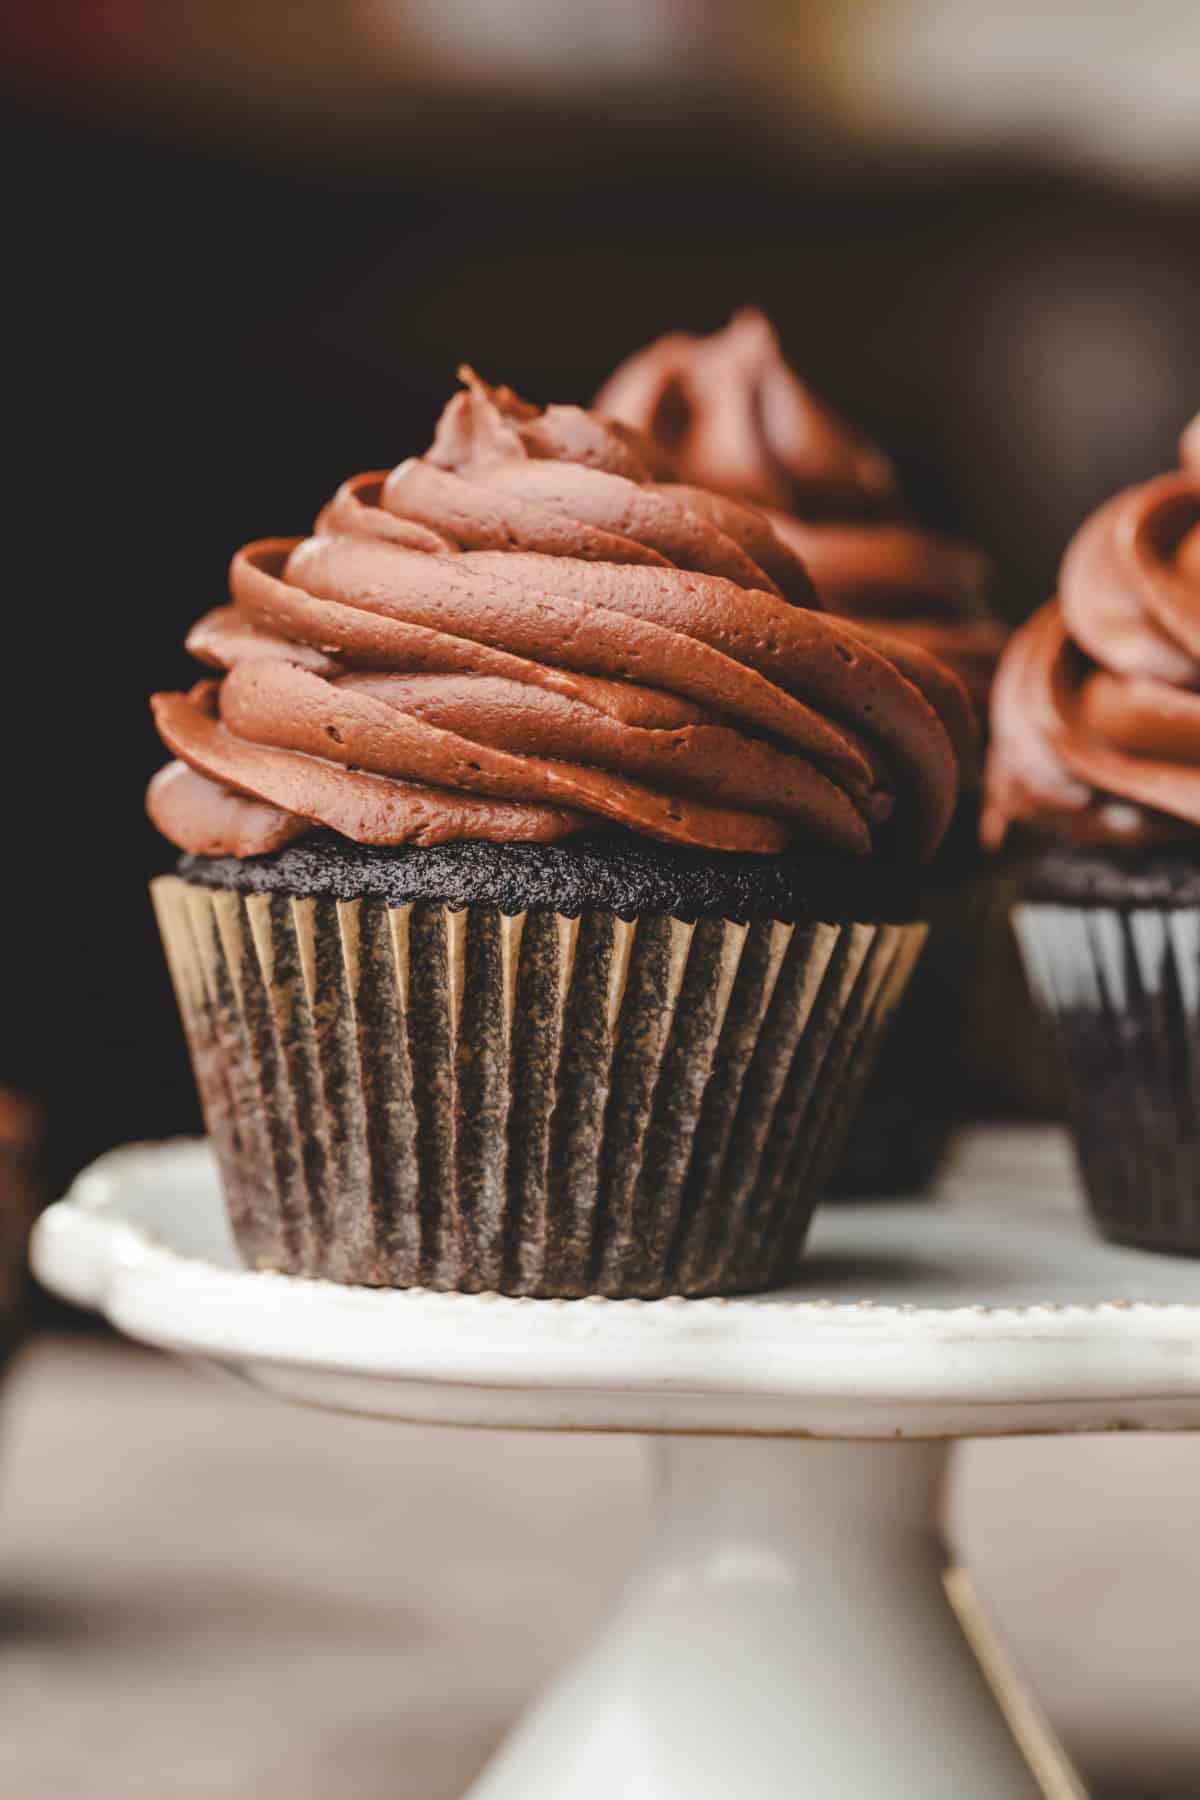 Chocolate cupcakes frosted with chocolate cream cheese frosting.